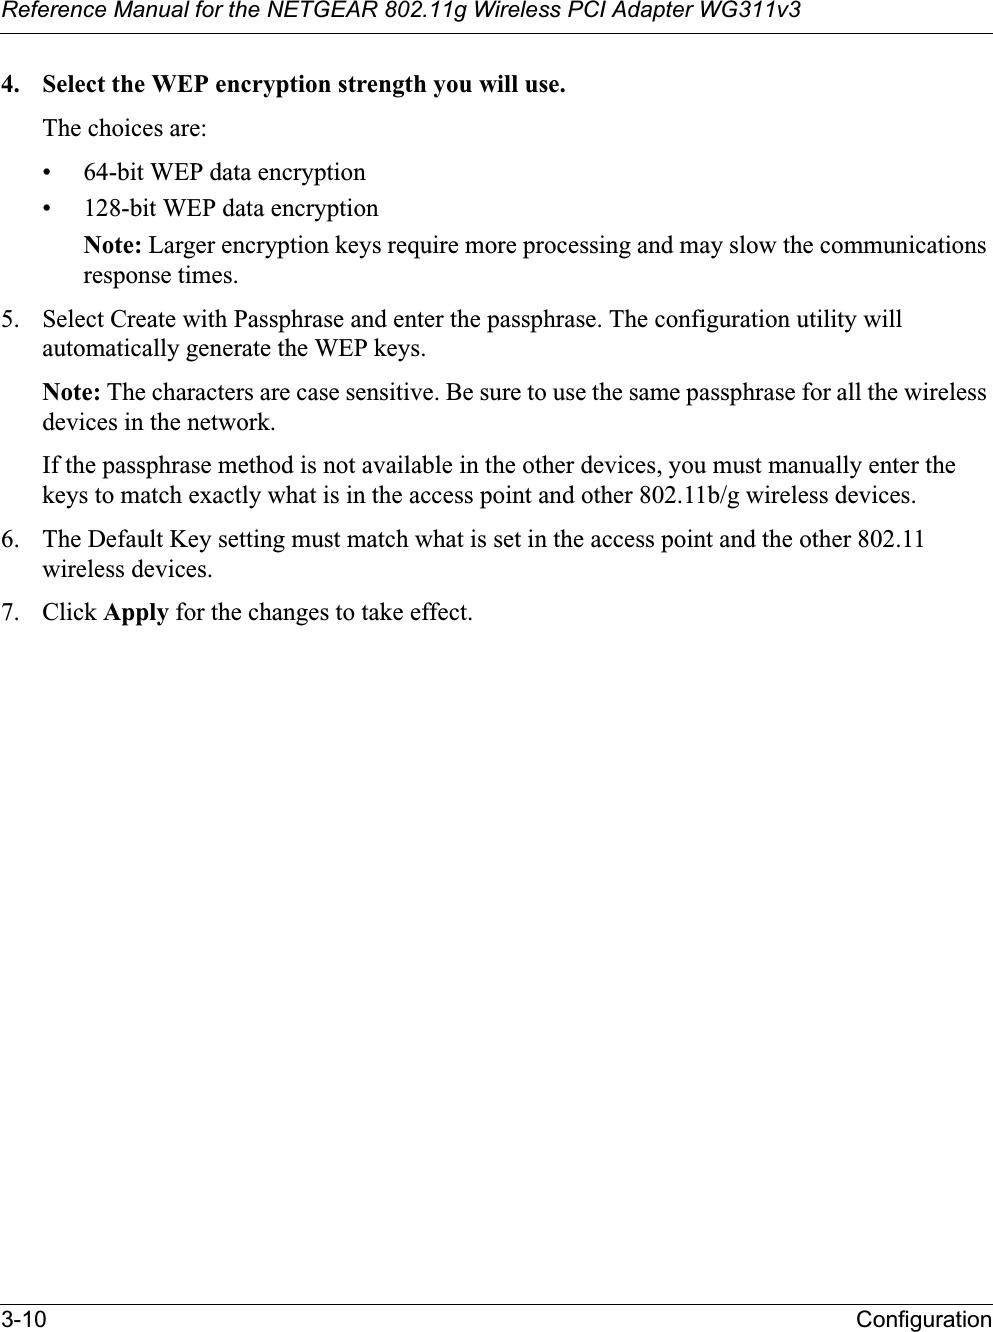 Reference Manual for the NETGEAR 802.11g Wireless PCI Adapter WG311v33-10 Configuration4. Select the WEP encryption strength you will use. The choices are:• 64-bit WEP data encryption • 128-bit WEP data encryption Note: Larger encryption keys require more processing and may slow the communications response times.5. Select Create with Passphrase and enter the passphrase. The configuration utility will automatically generate the WEP keys.Note: The characters are case sensitive. Be sure to use the same passphrase for all the wireless devices in the network. If the passphrase method is not available in the other devices, you must manually enter the keys to match exactly what is in the access point and other 802.11b/g wireless devices.6. The Default Key setting must match what is set in the access point and the other 802.11 wireless devices. 7. Click Apply for the changes to take effect.